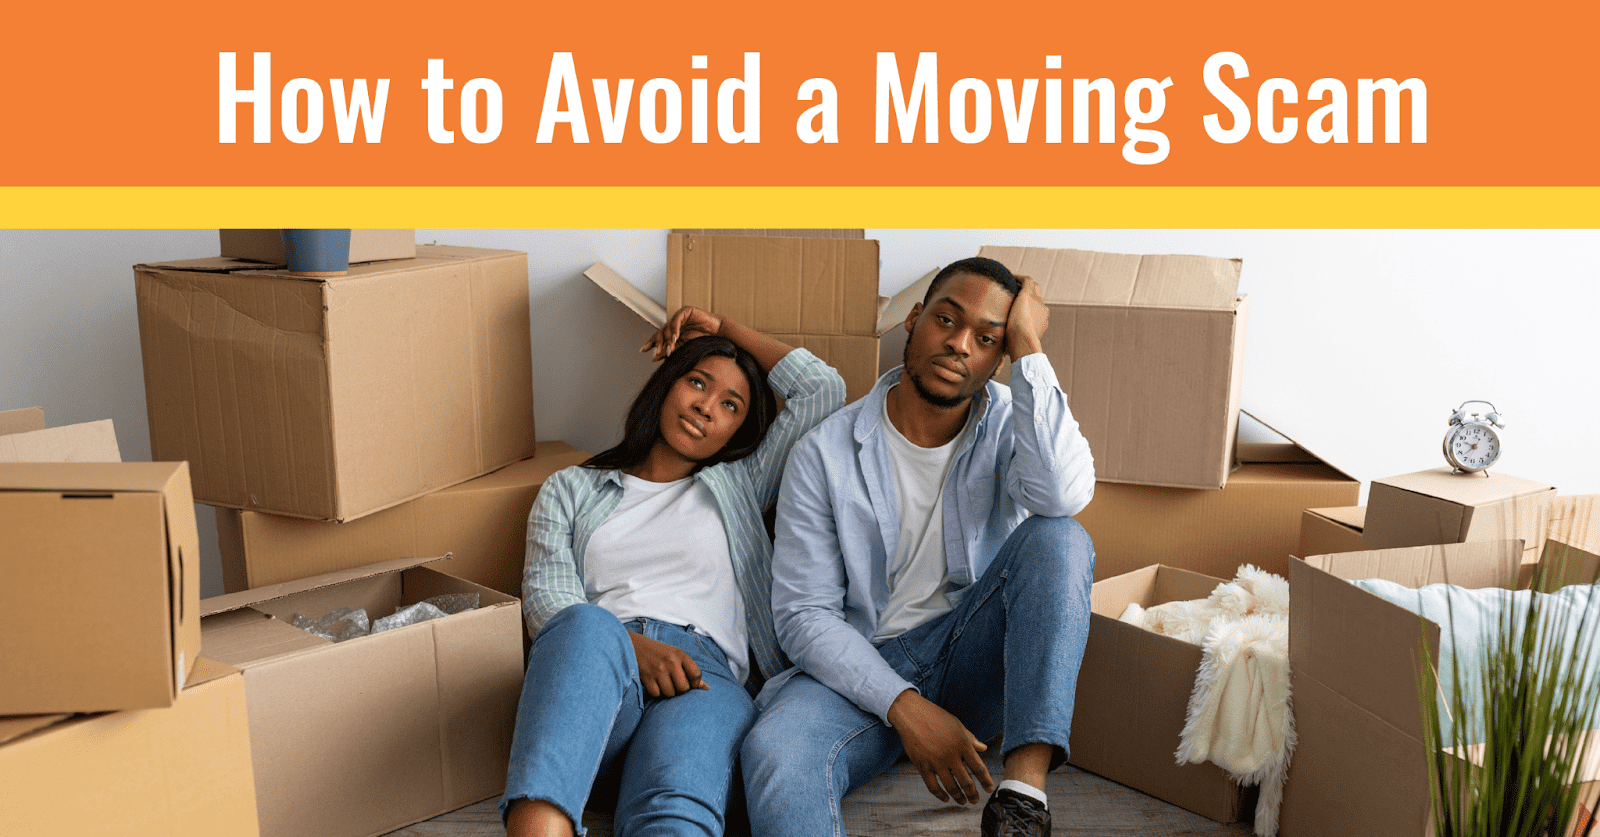 How to Avoid a Moving Scam